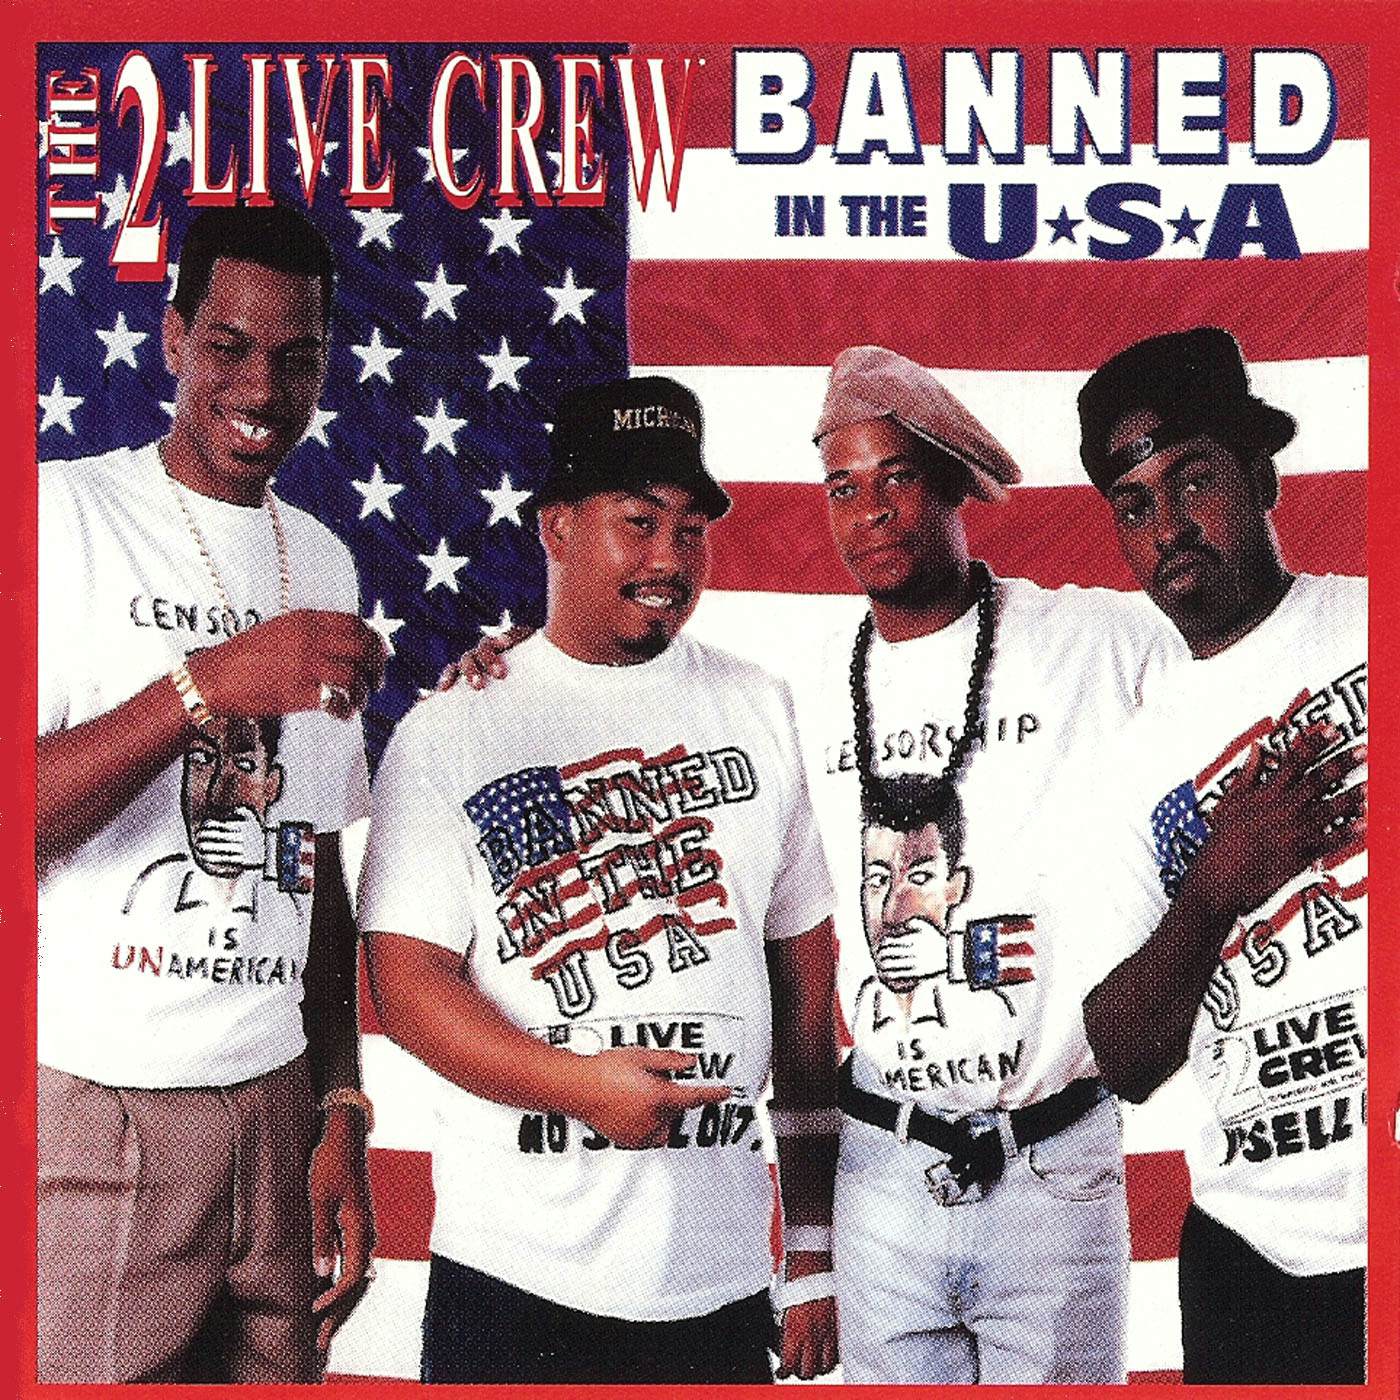 2 LIVE CREW BANNED IN THE USA CD